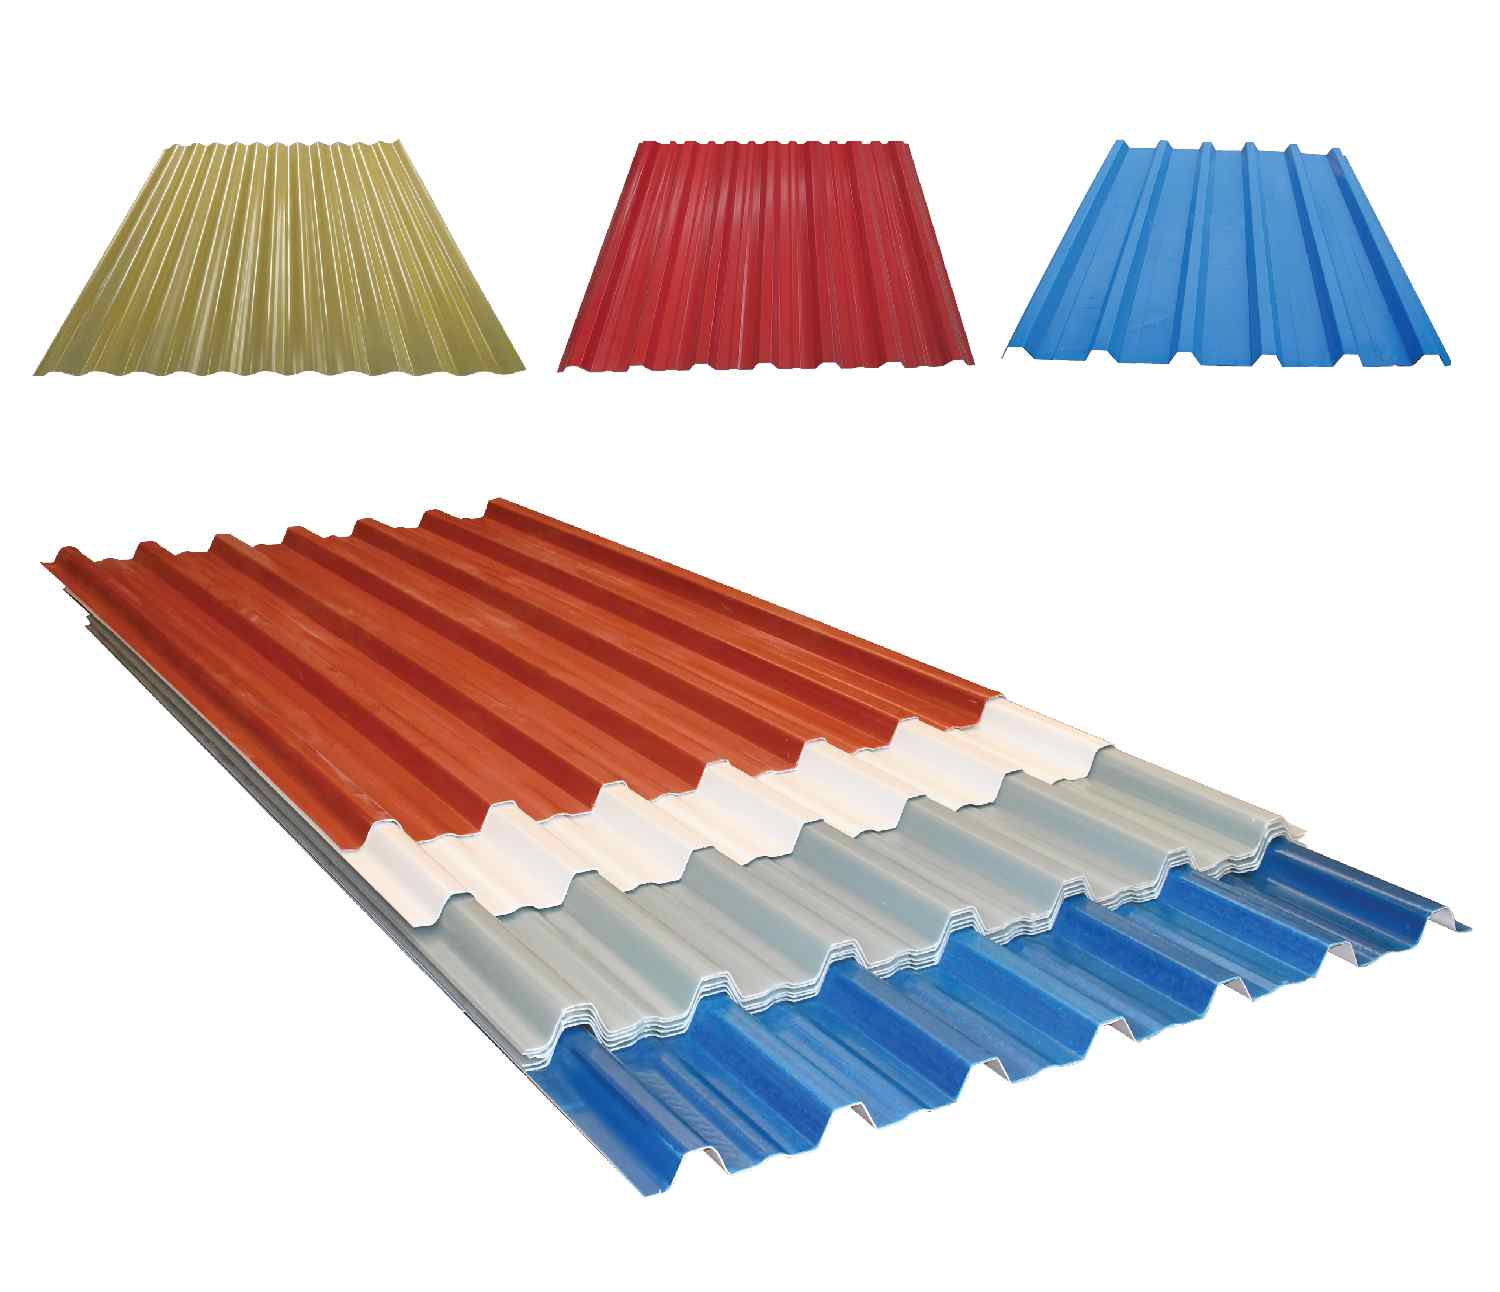 uPVC ROOFING SHEETS